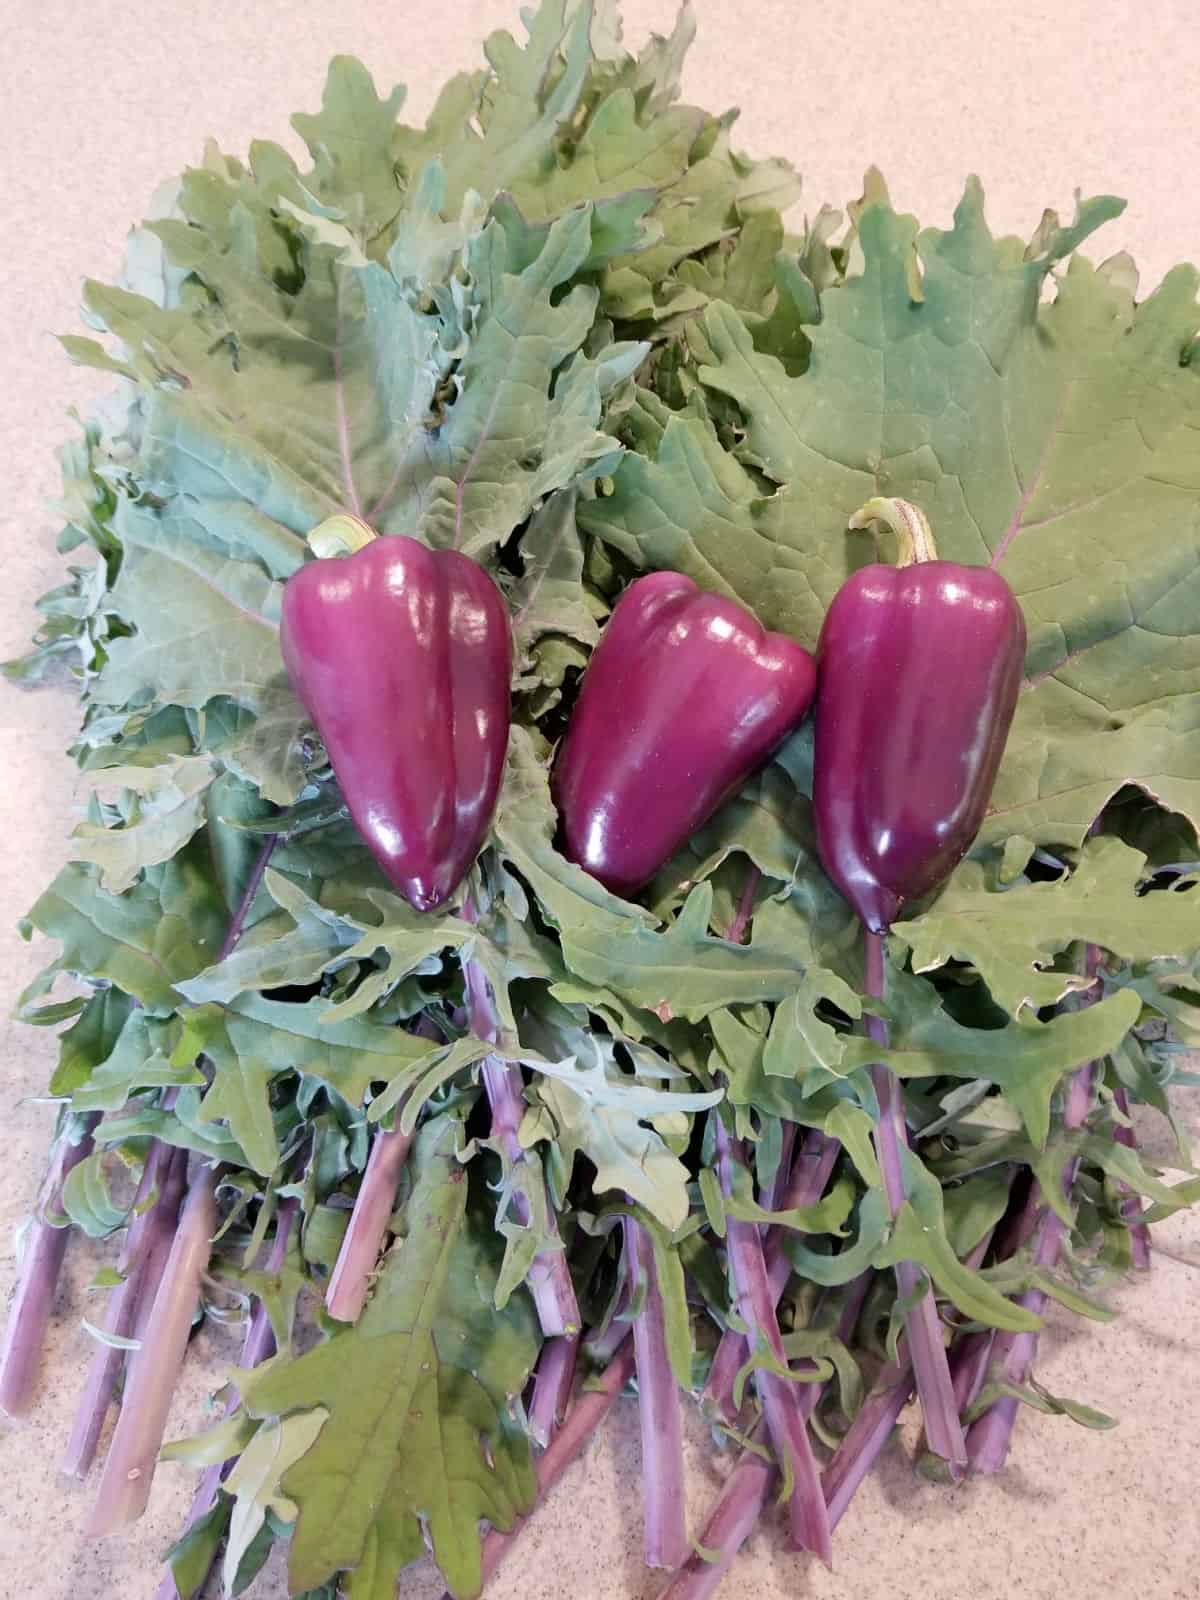 3 purple Oda bell peppers resting on a pile of Dazzling Blue Kale leaves